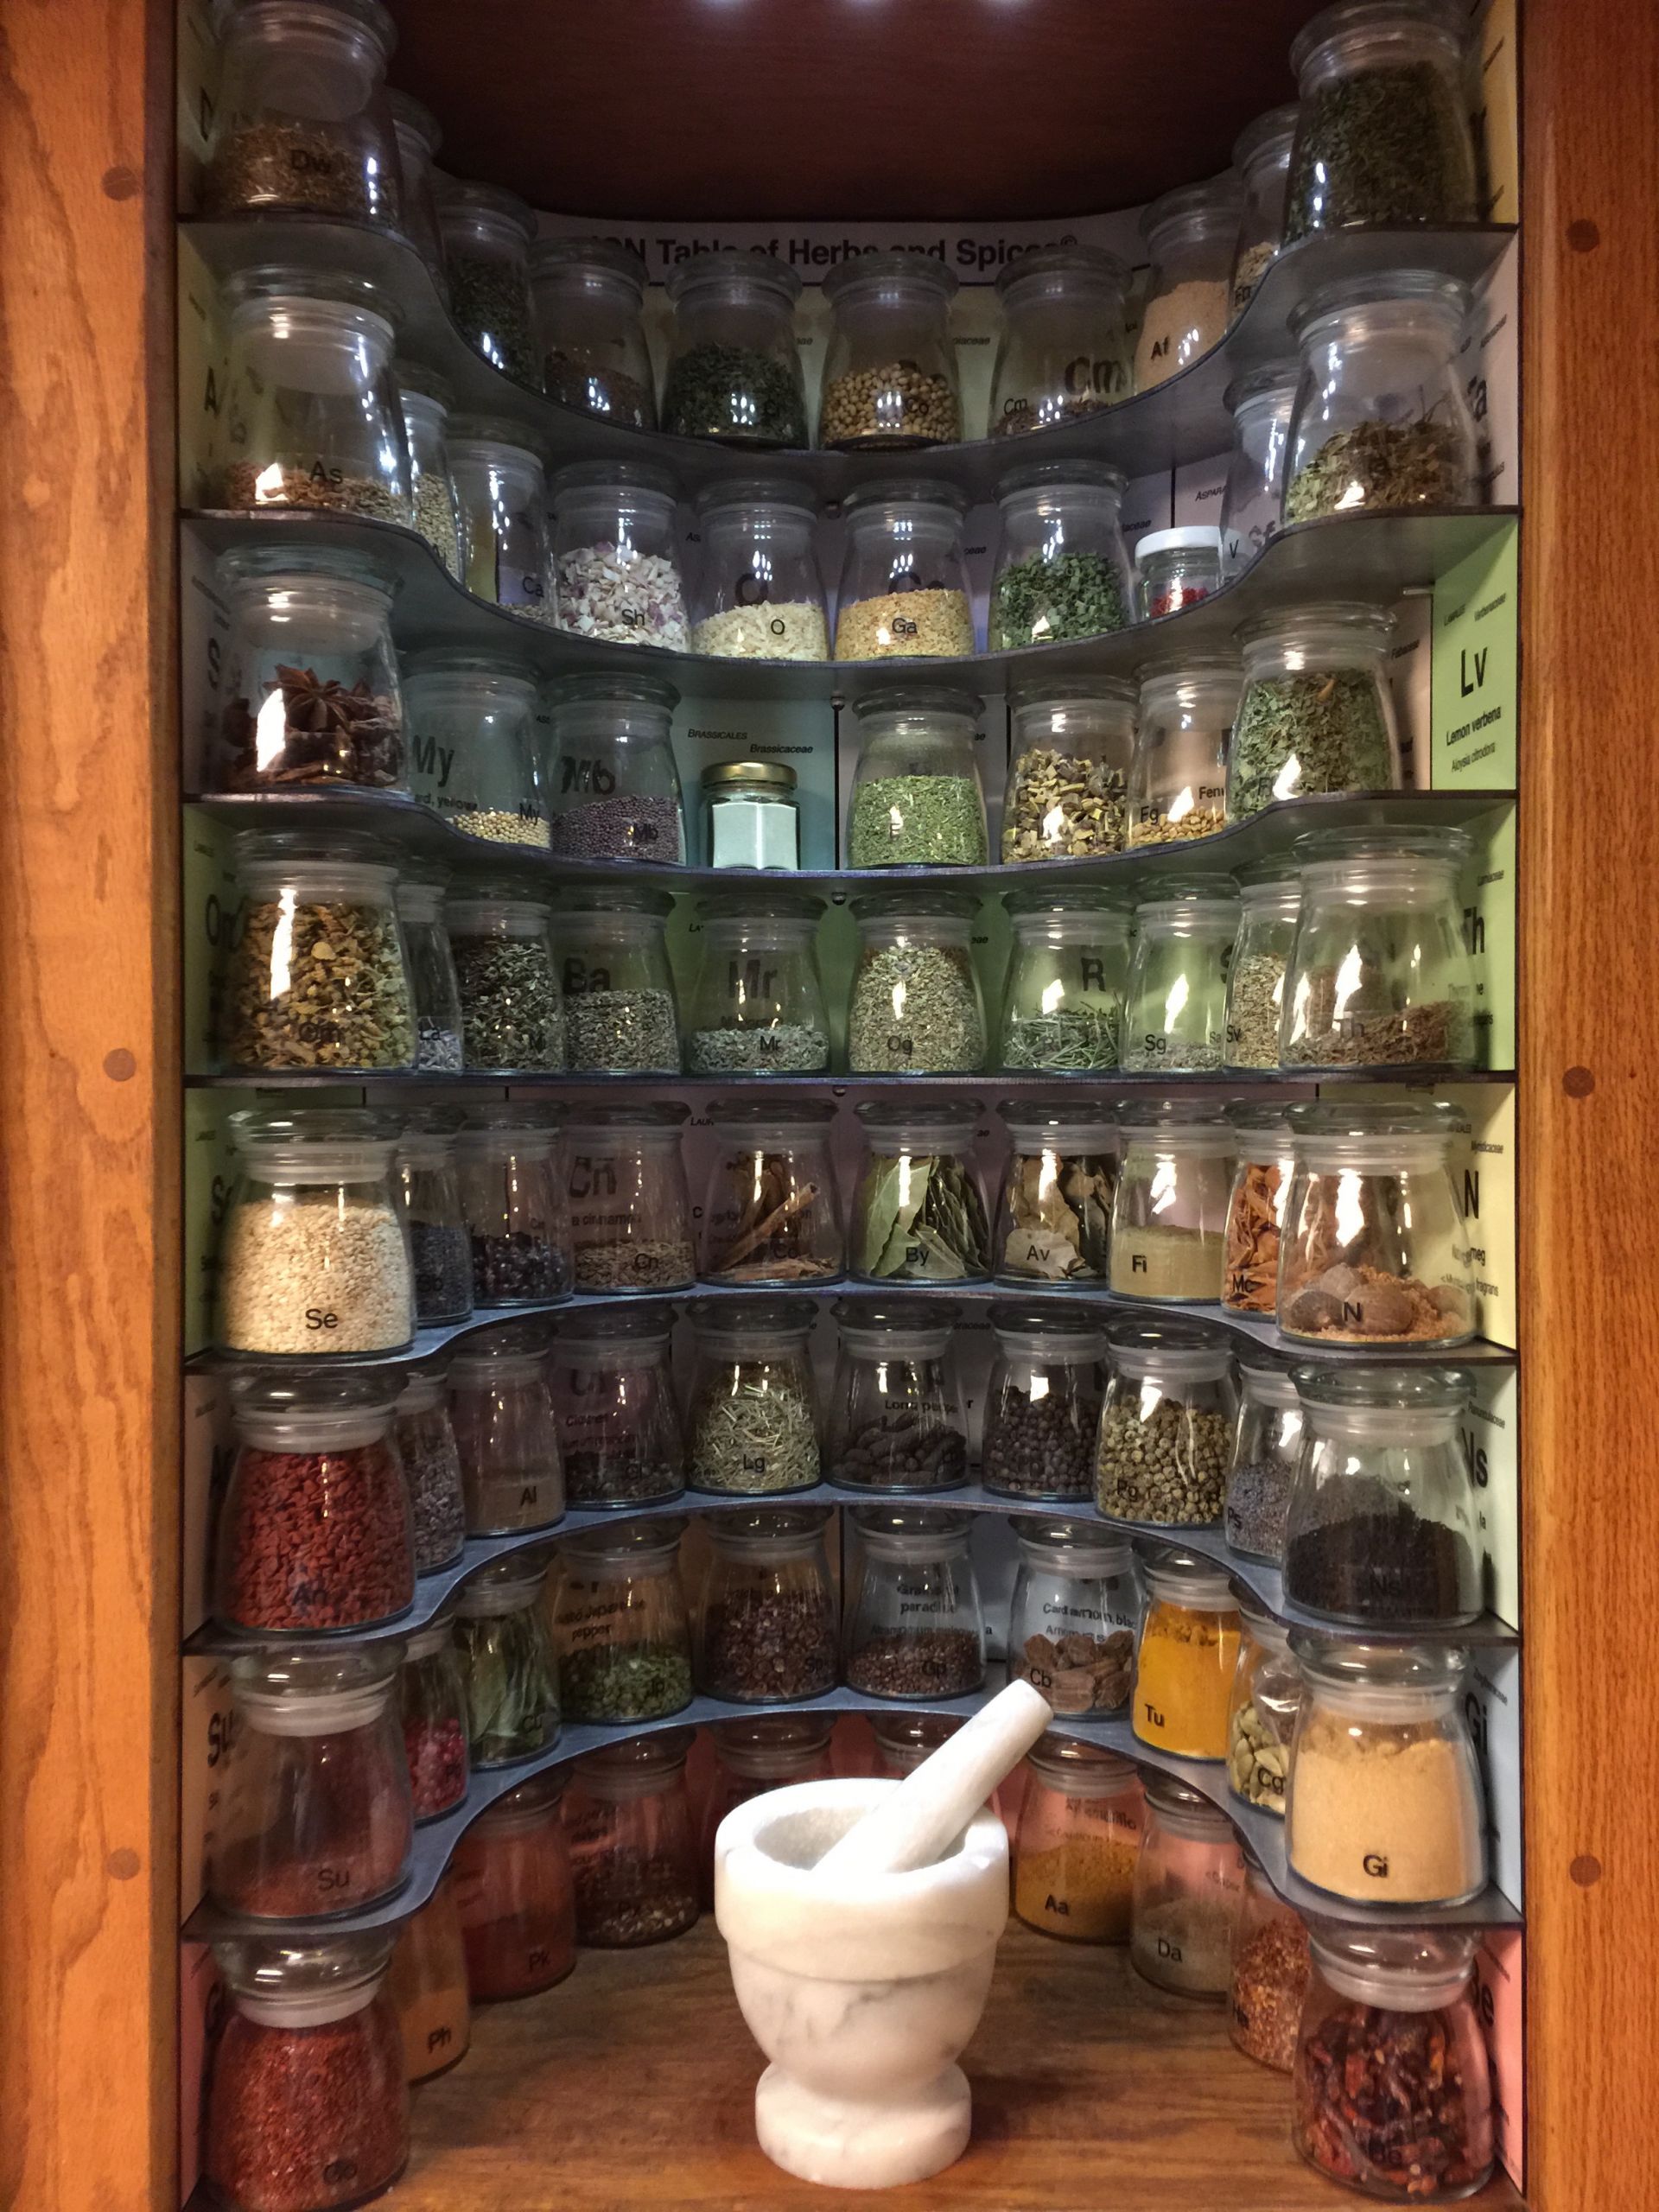 Kitchen Spice Storage
 Kitchen Geeks Build This Periodic Table of Spices Rack